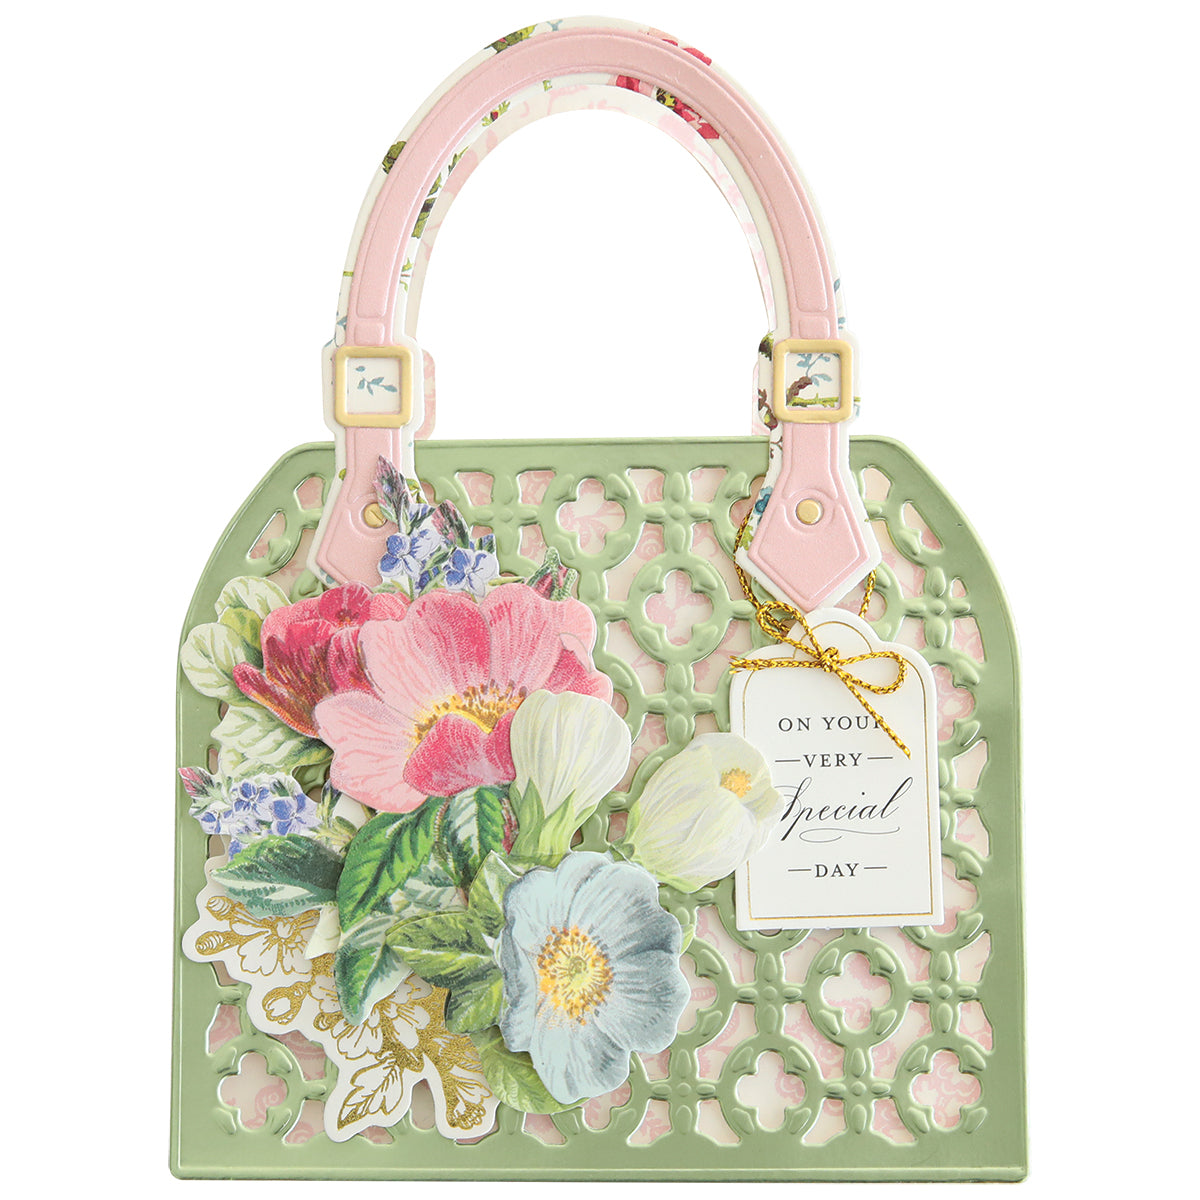 a handbag with flowers painted on it.